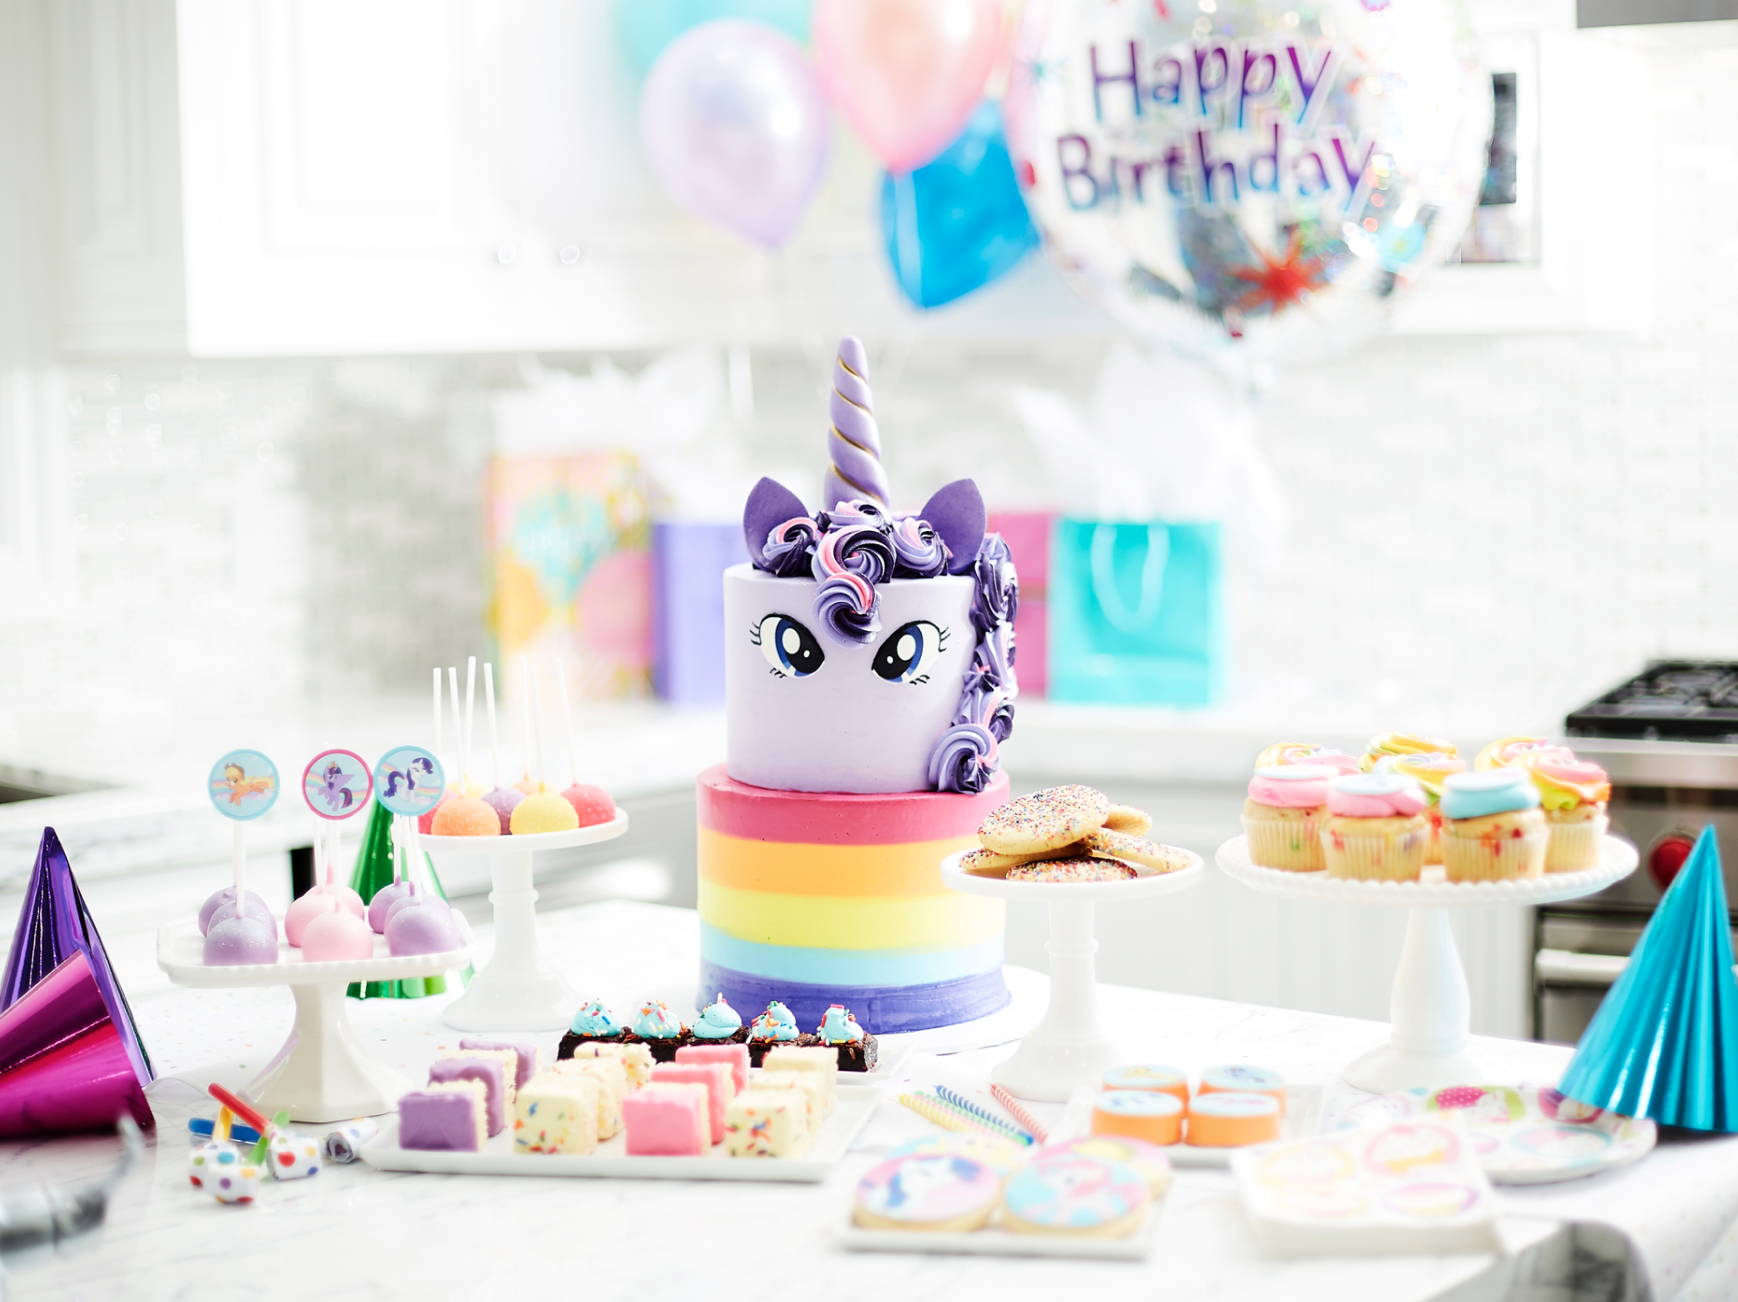 Little Pony party